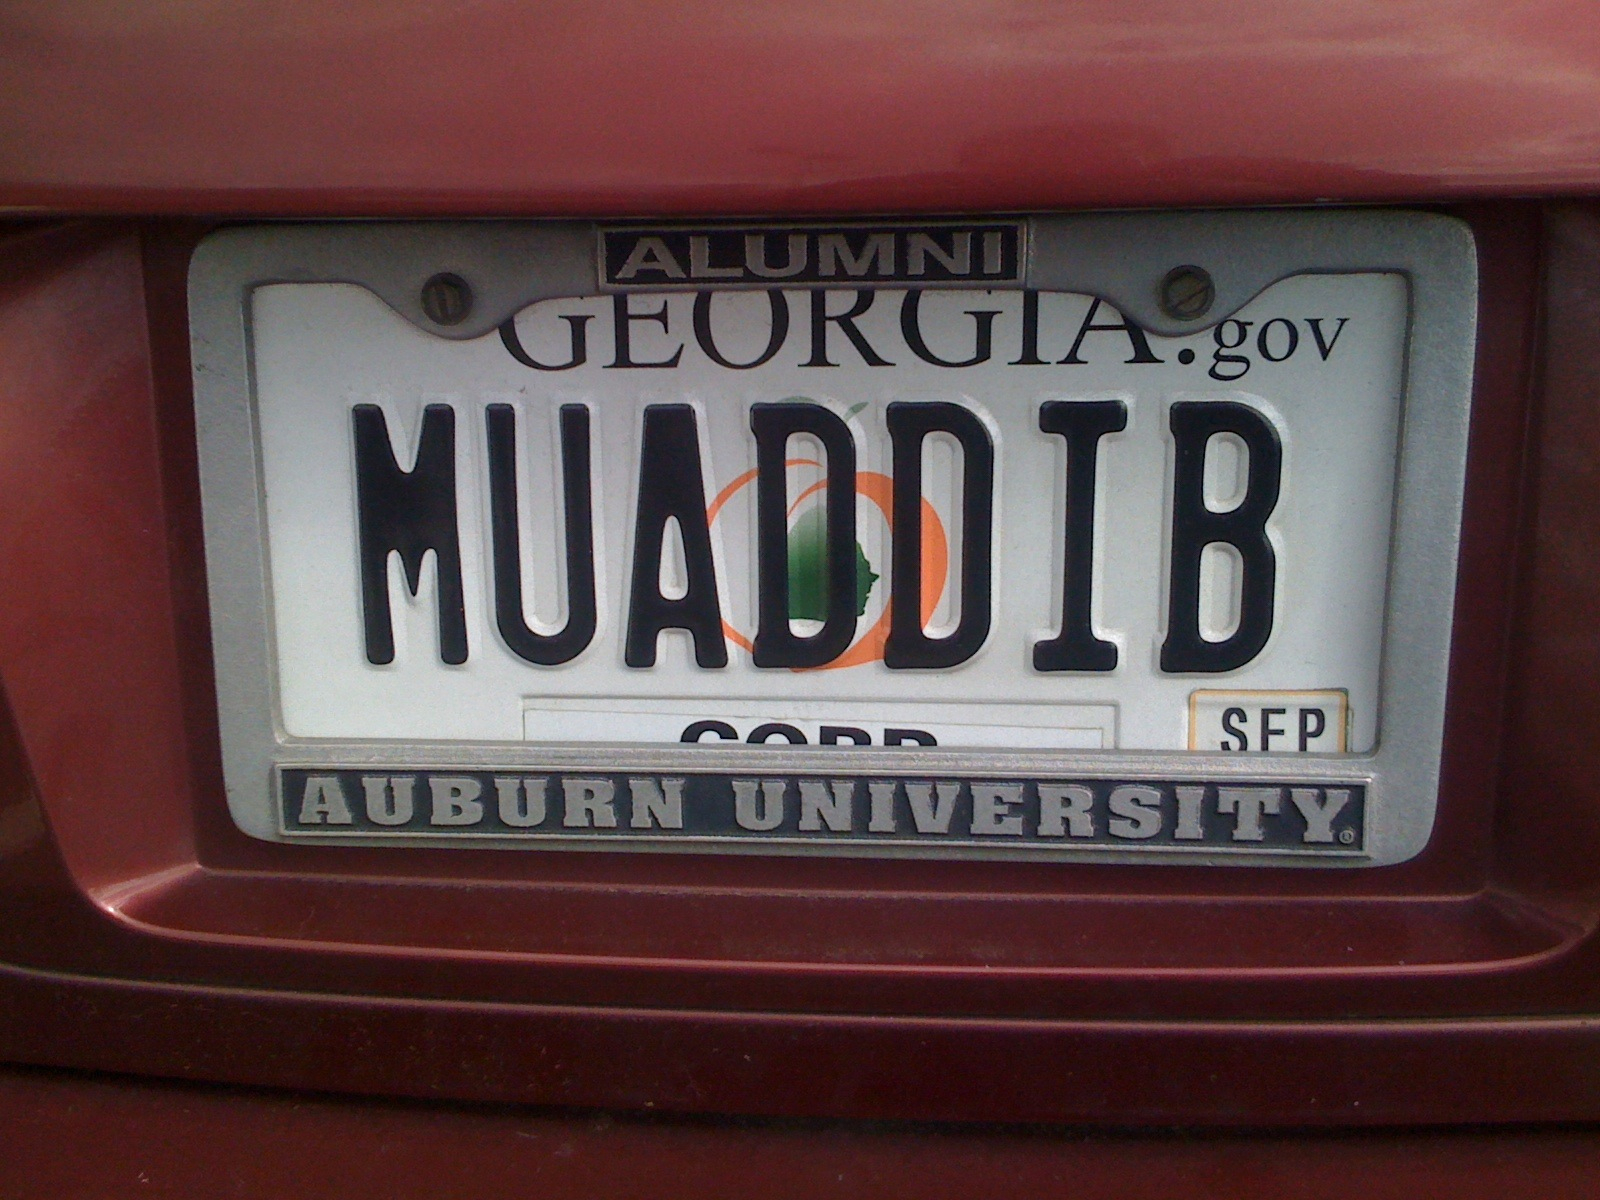 a license plate of a university from a car